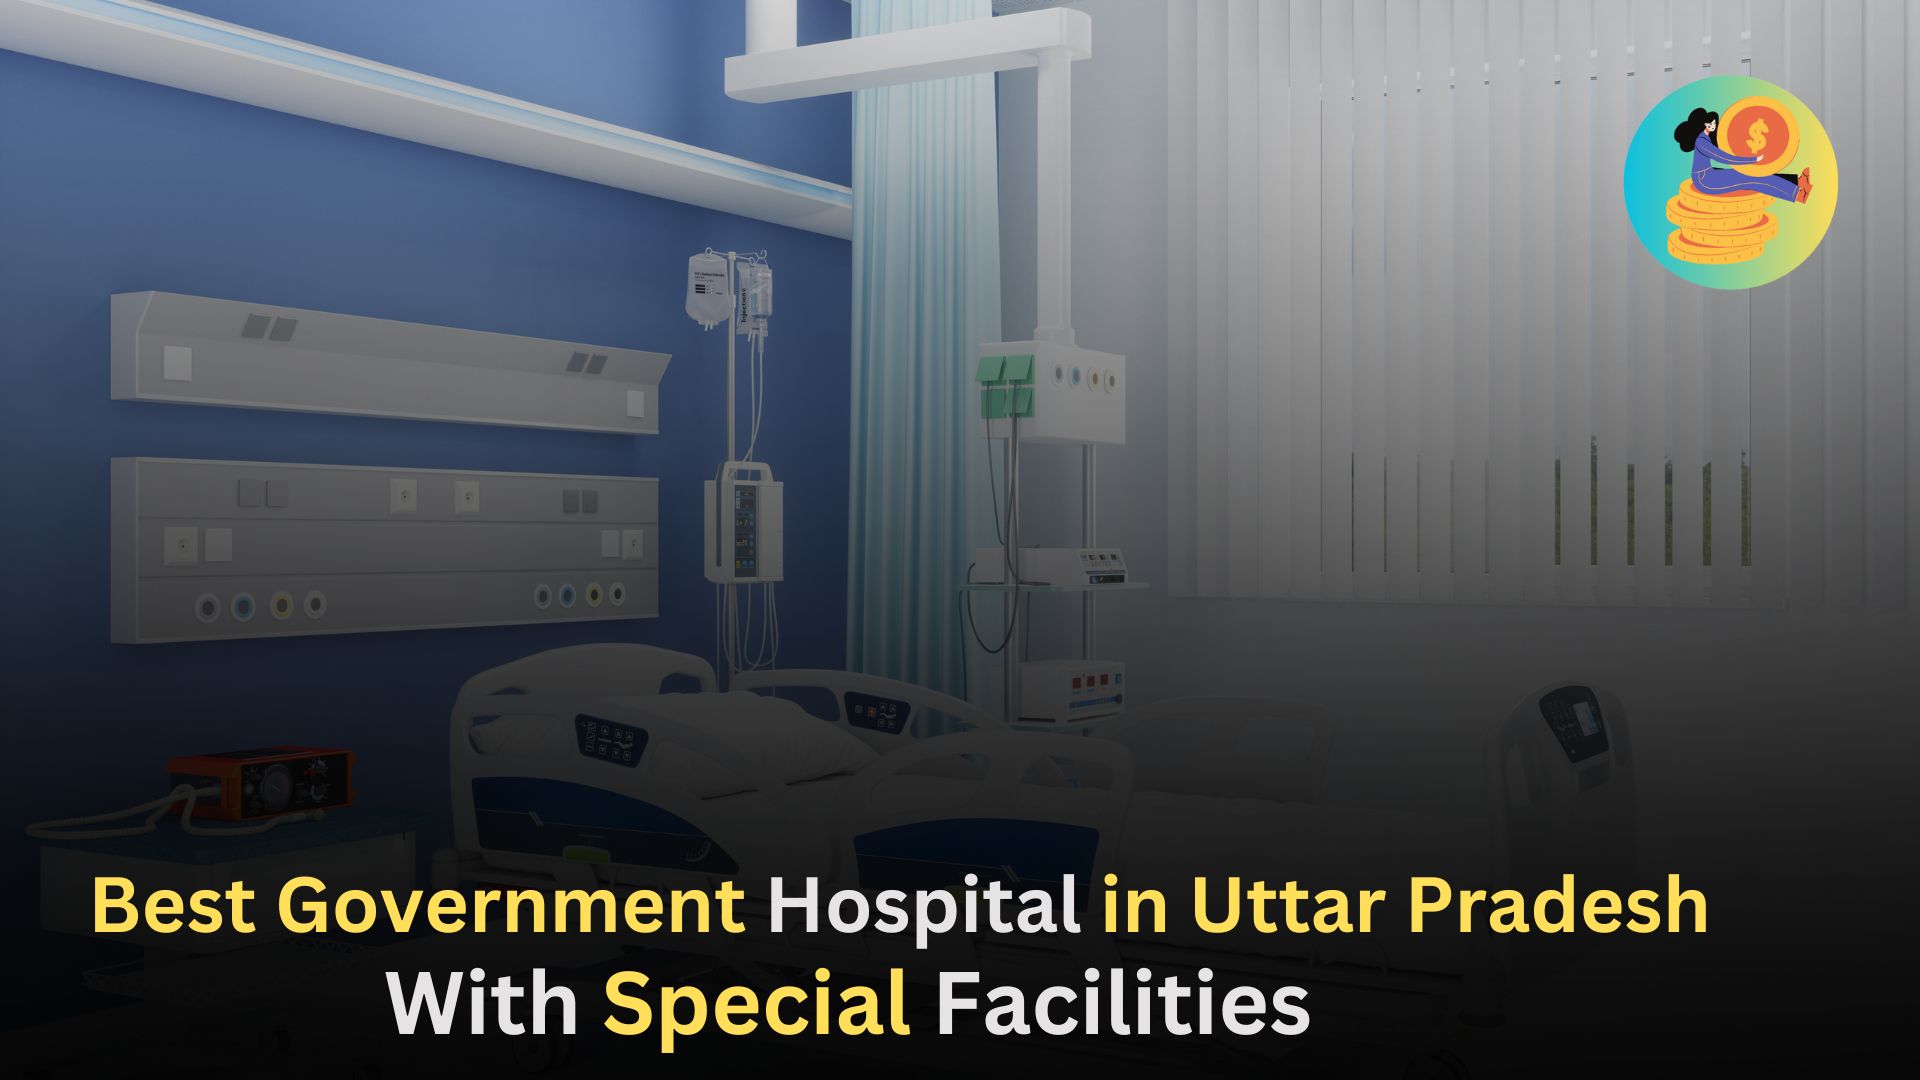 Best Government Hospital in Uttar Pradesh,With Special Facilities 